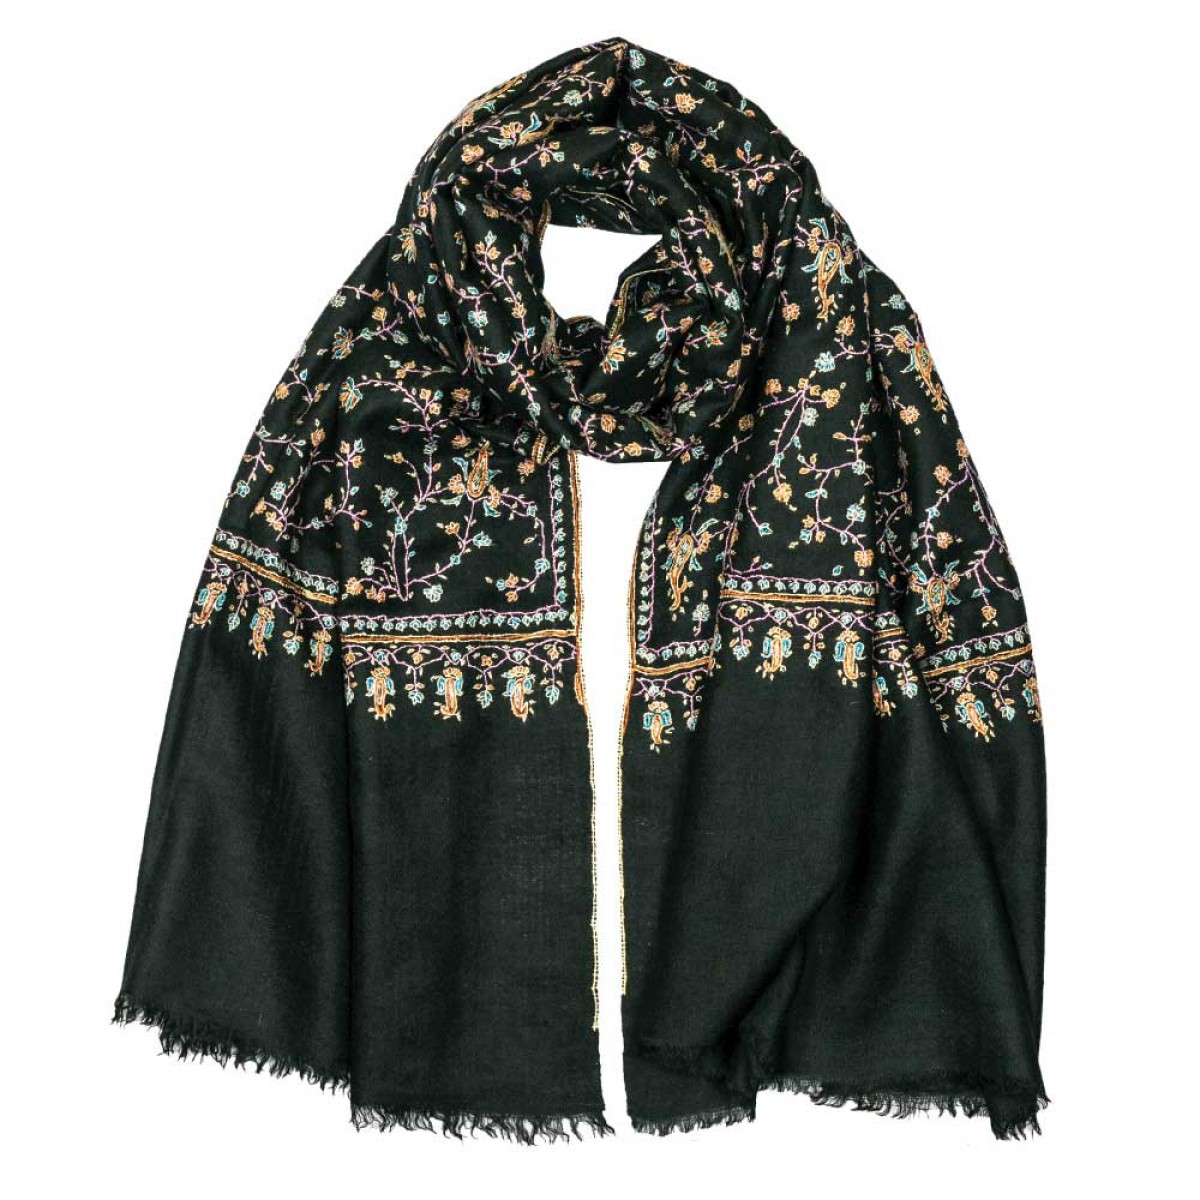 Embroidered Pashmina Stole - Black All Over